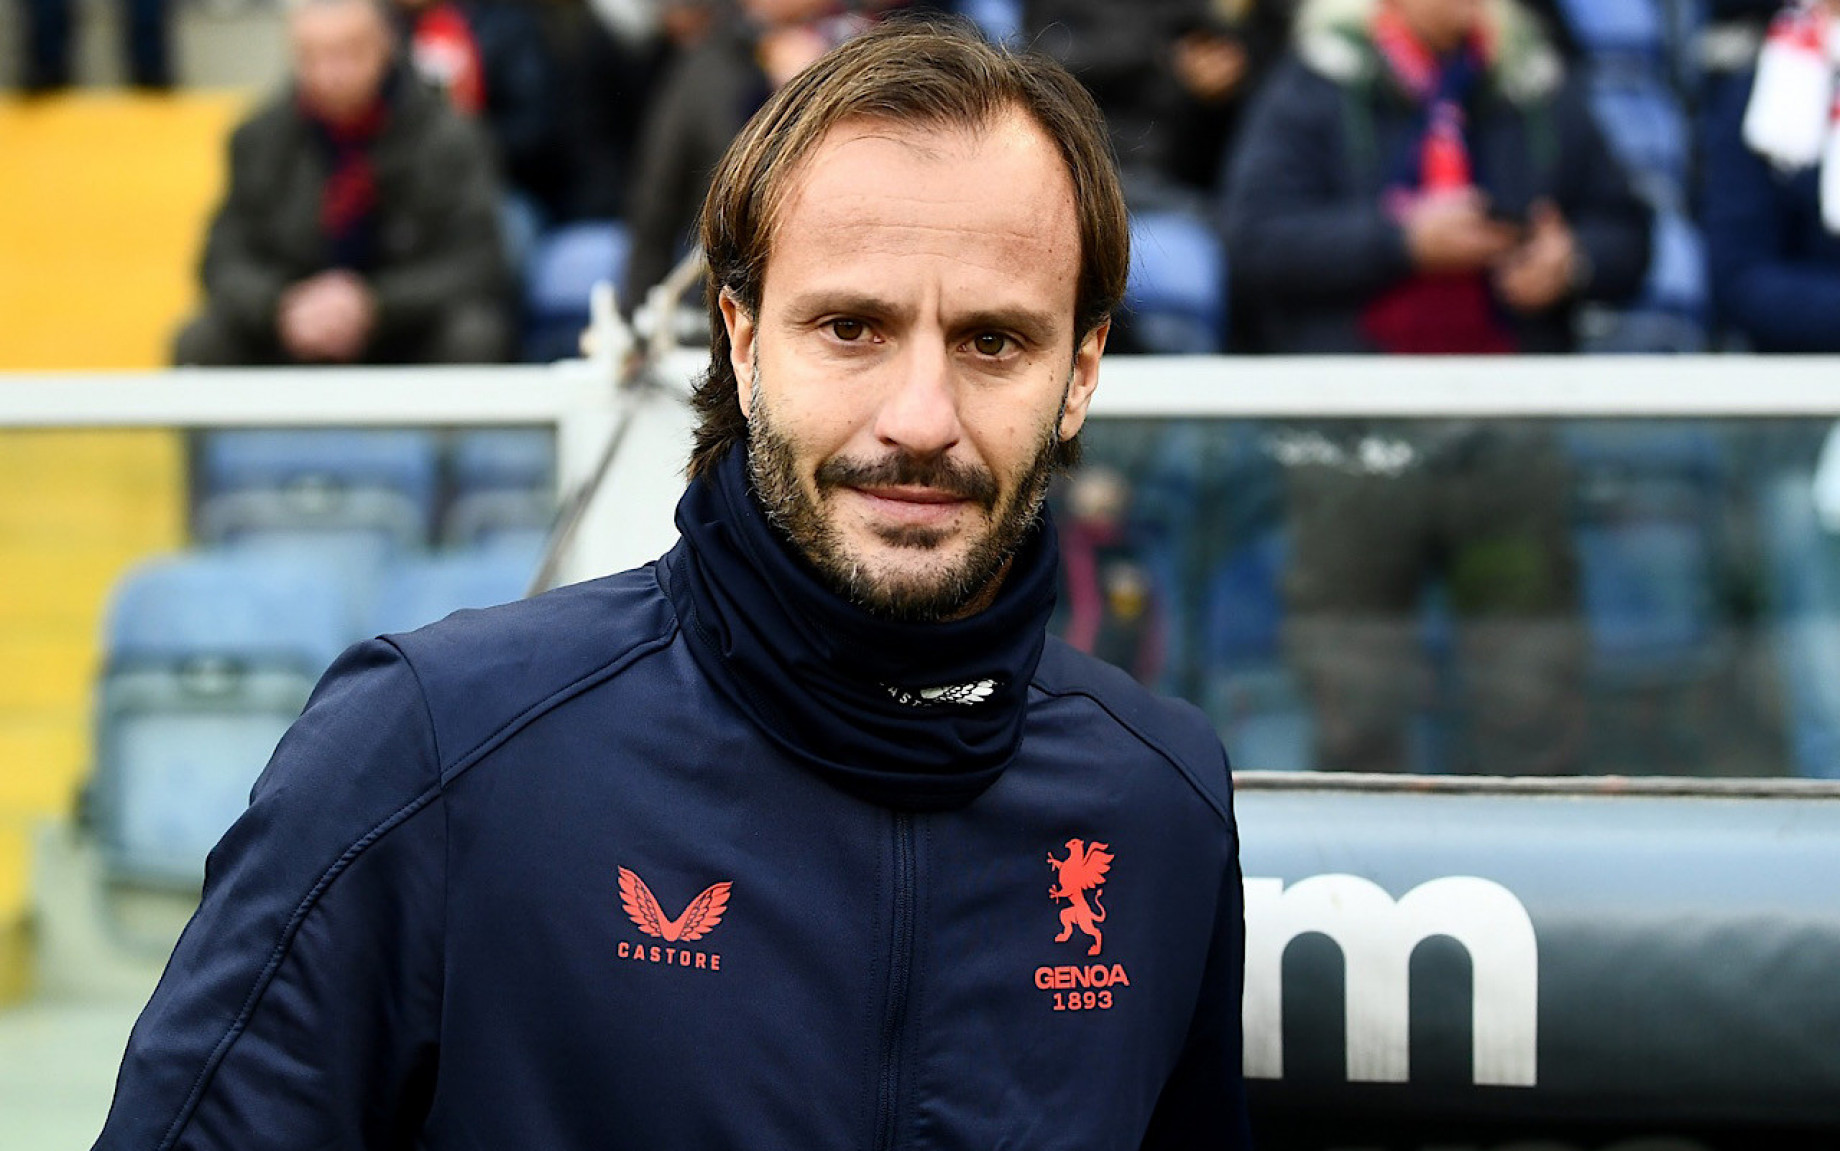 Only three teams have had the honors of going unbeaten so far in Serie A, and Lecce are one of them. Gilardino feels his Genoa have to proceed with caution.